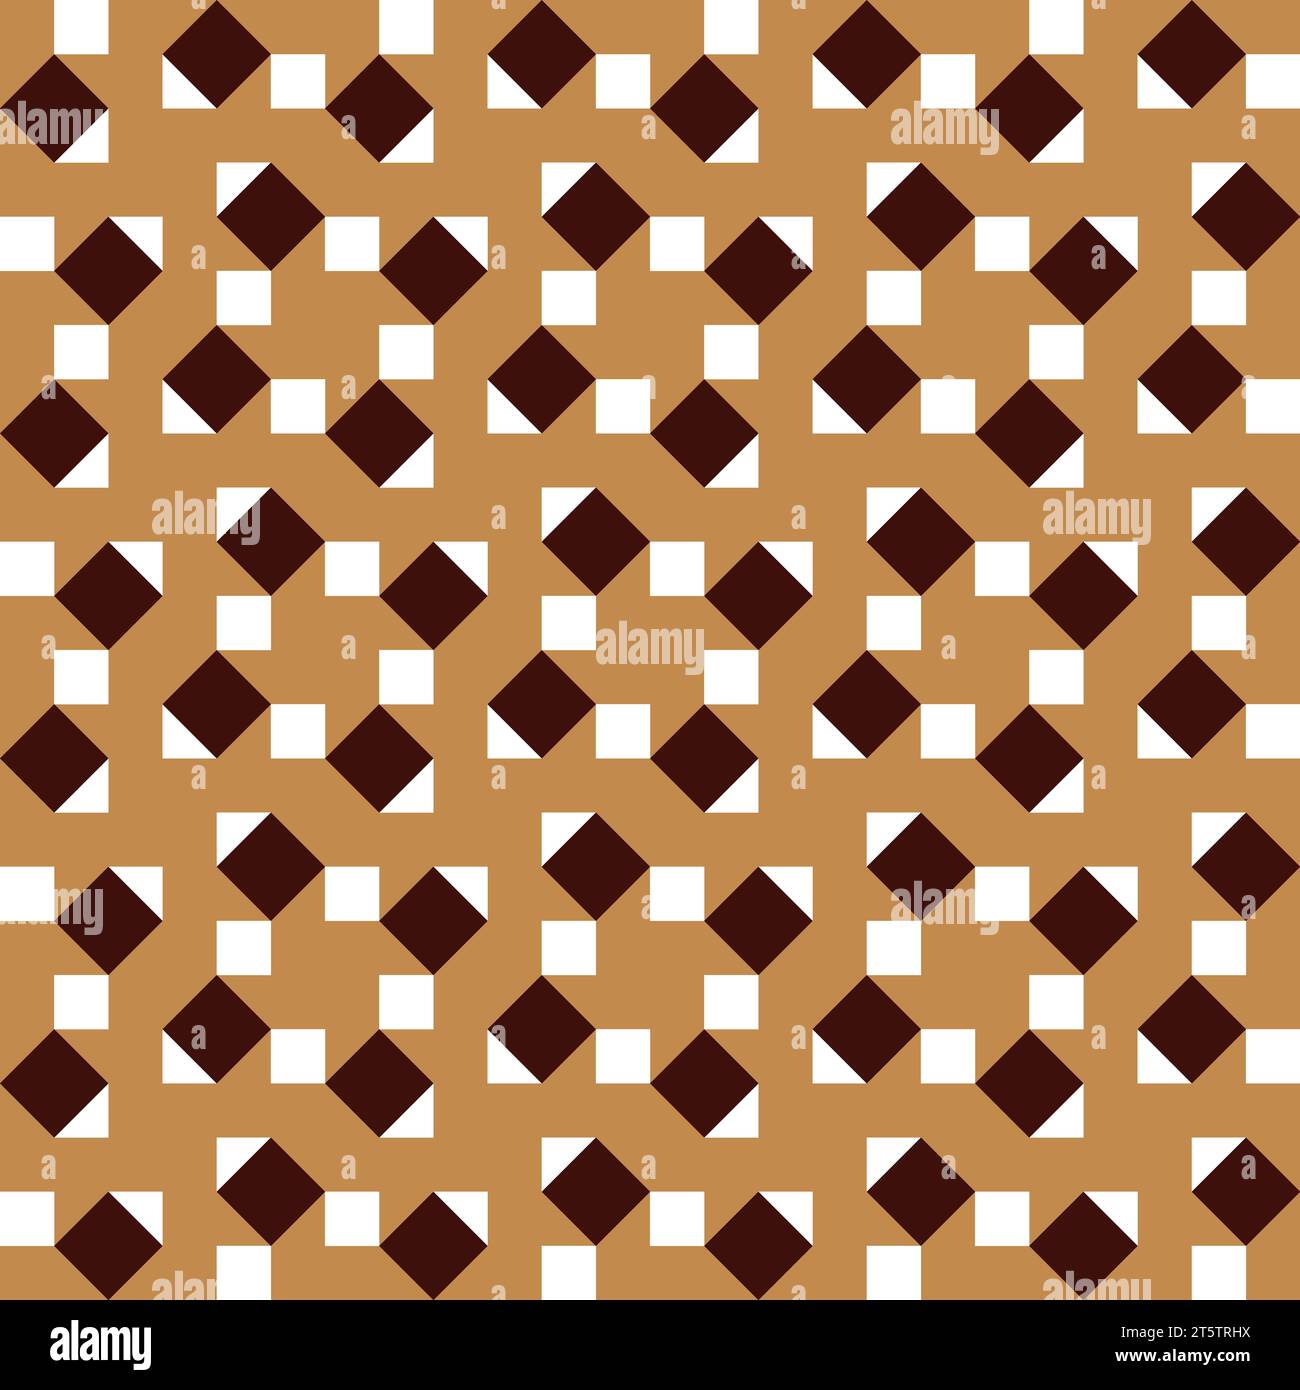 Seamless pattern with geometric motifs in 3 colors Stock Photo